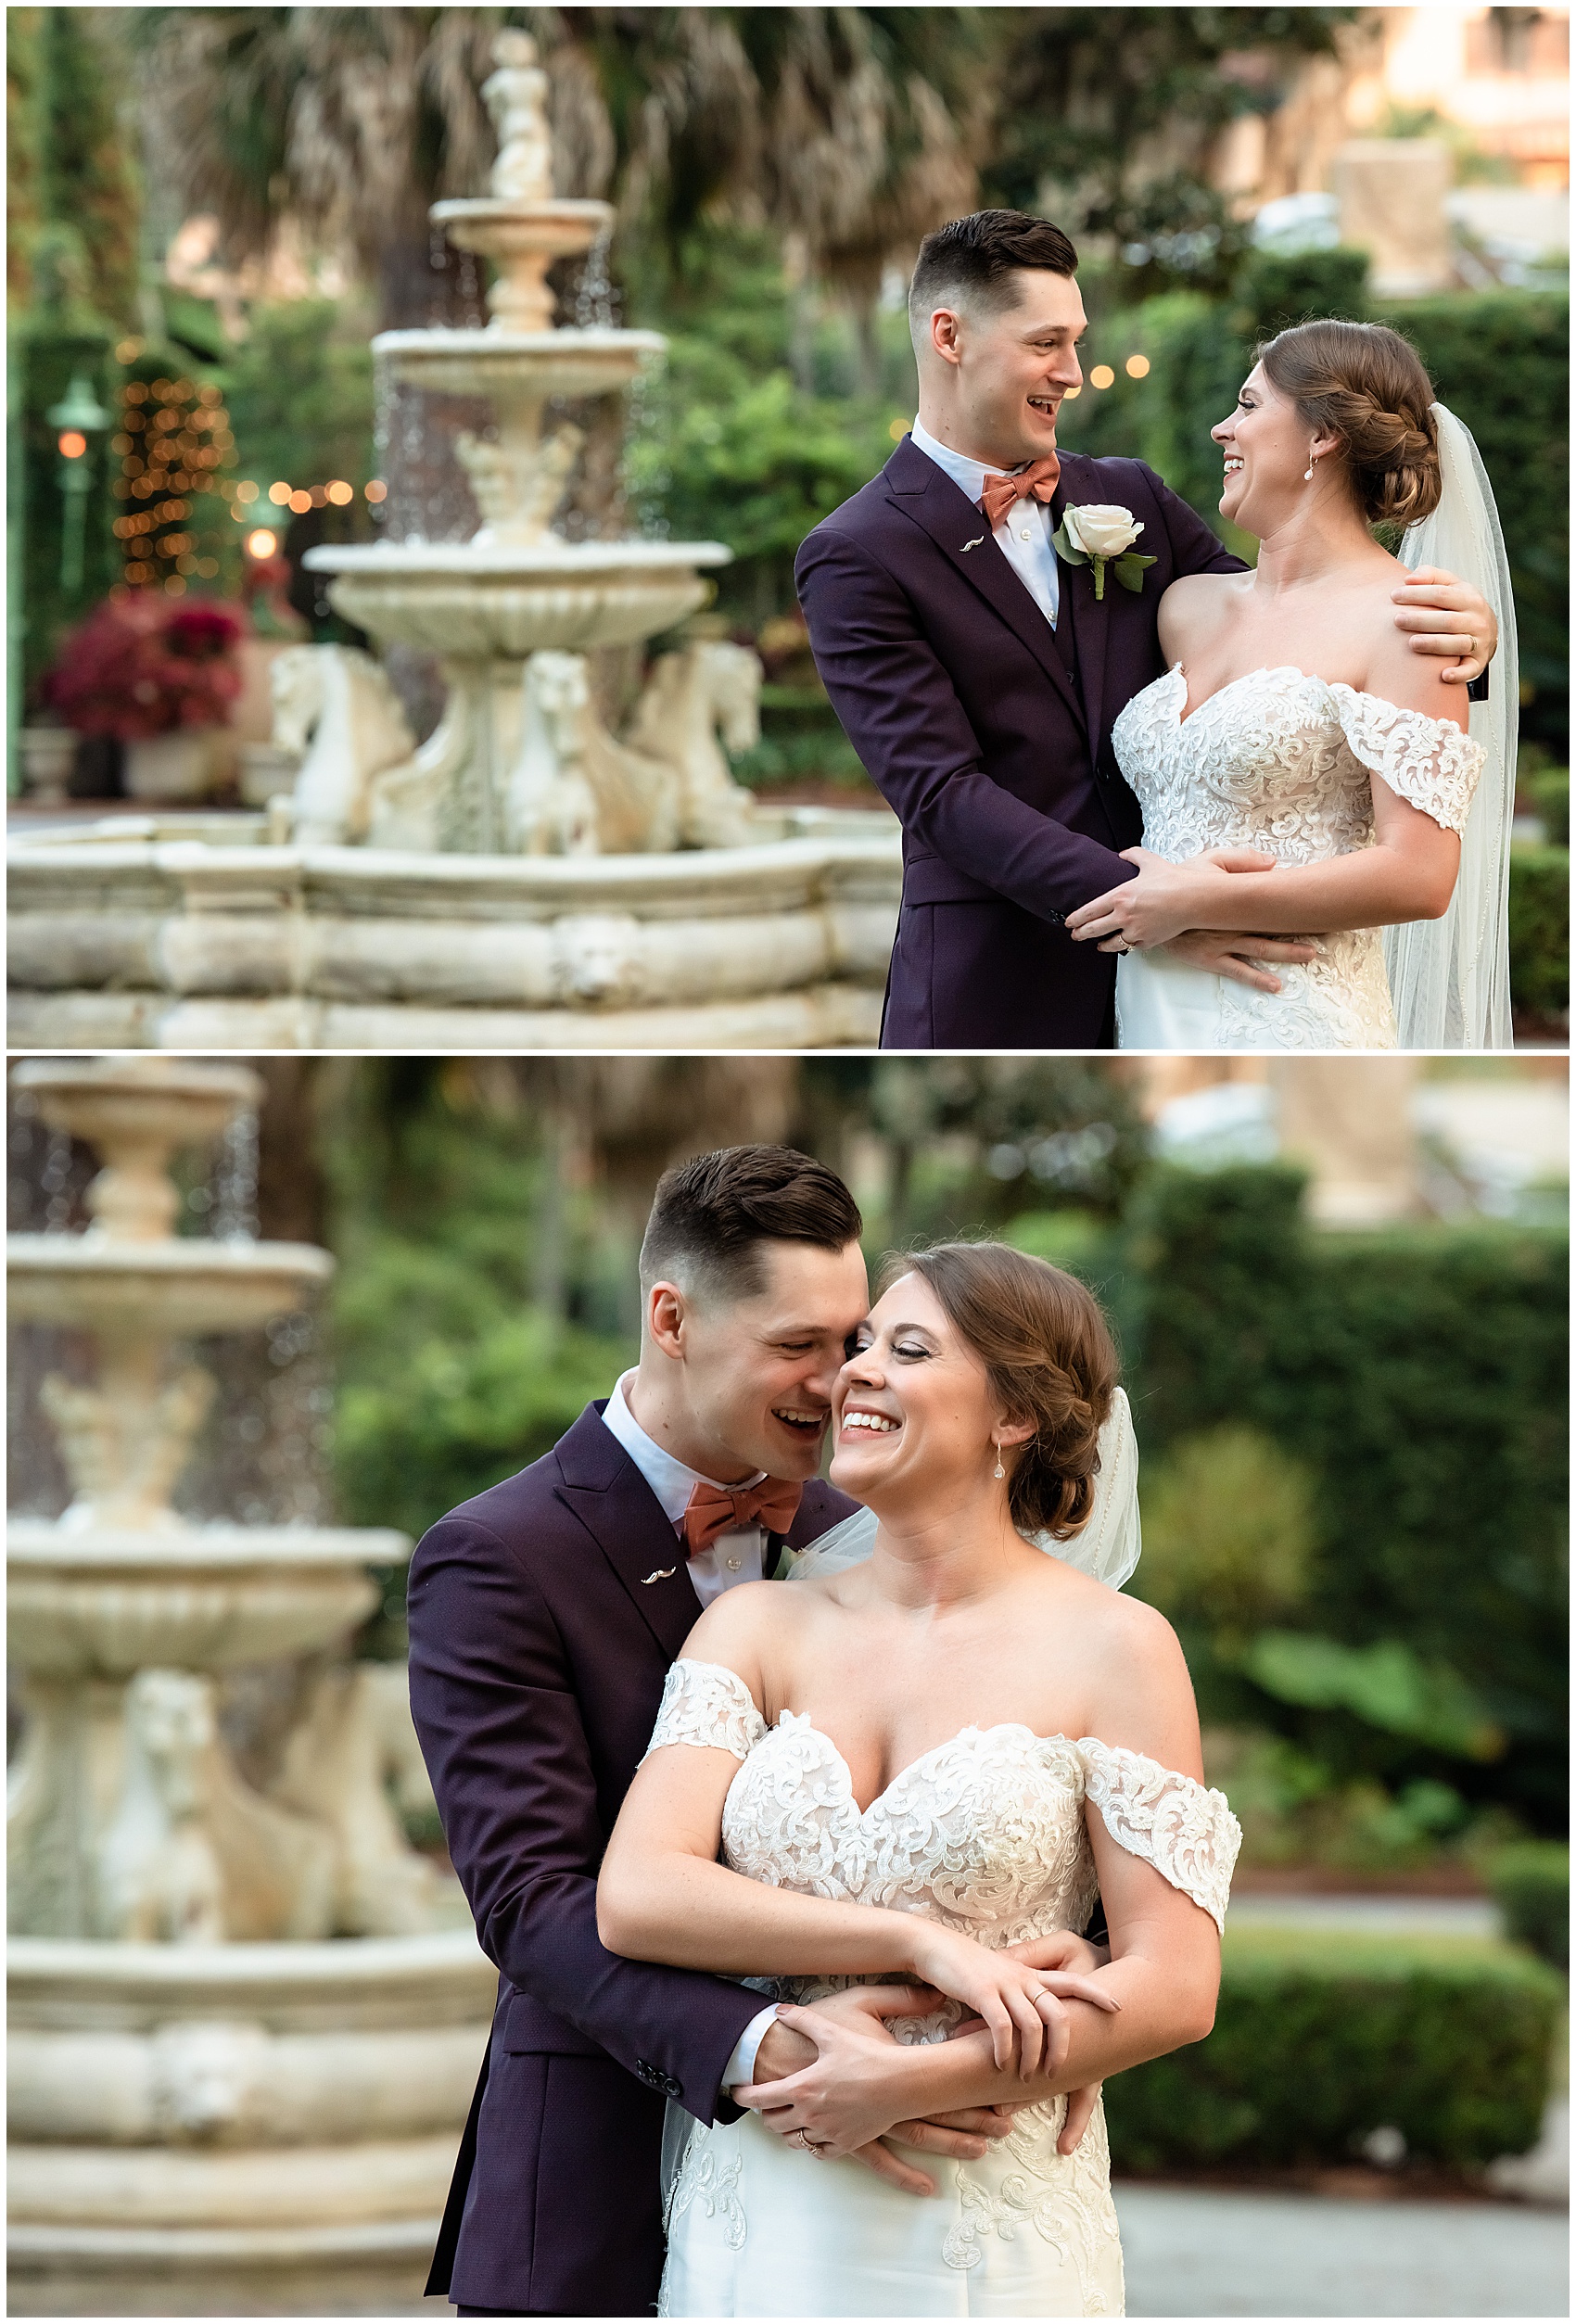 Newlyweds laugh and hug in a garden with fountains at sunset at their club continental wedding